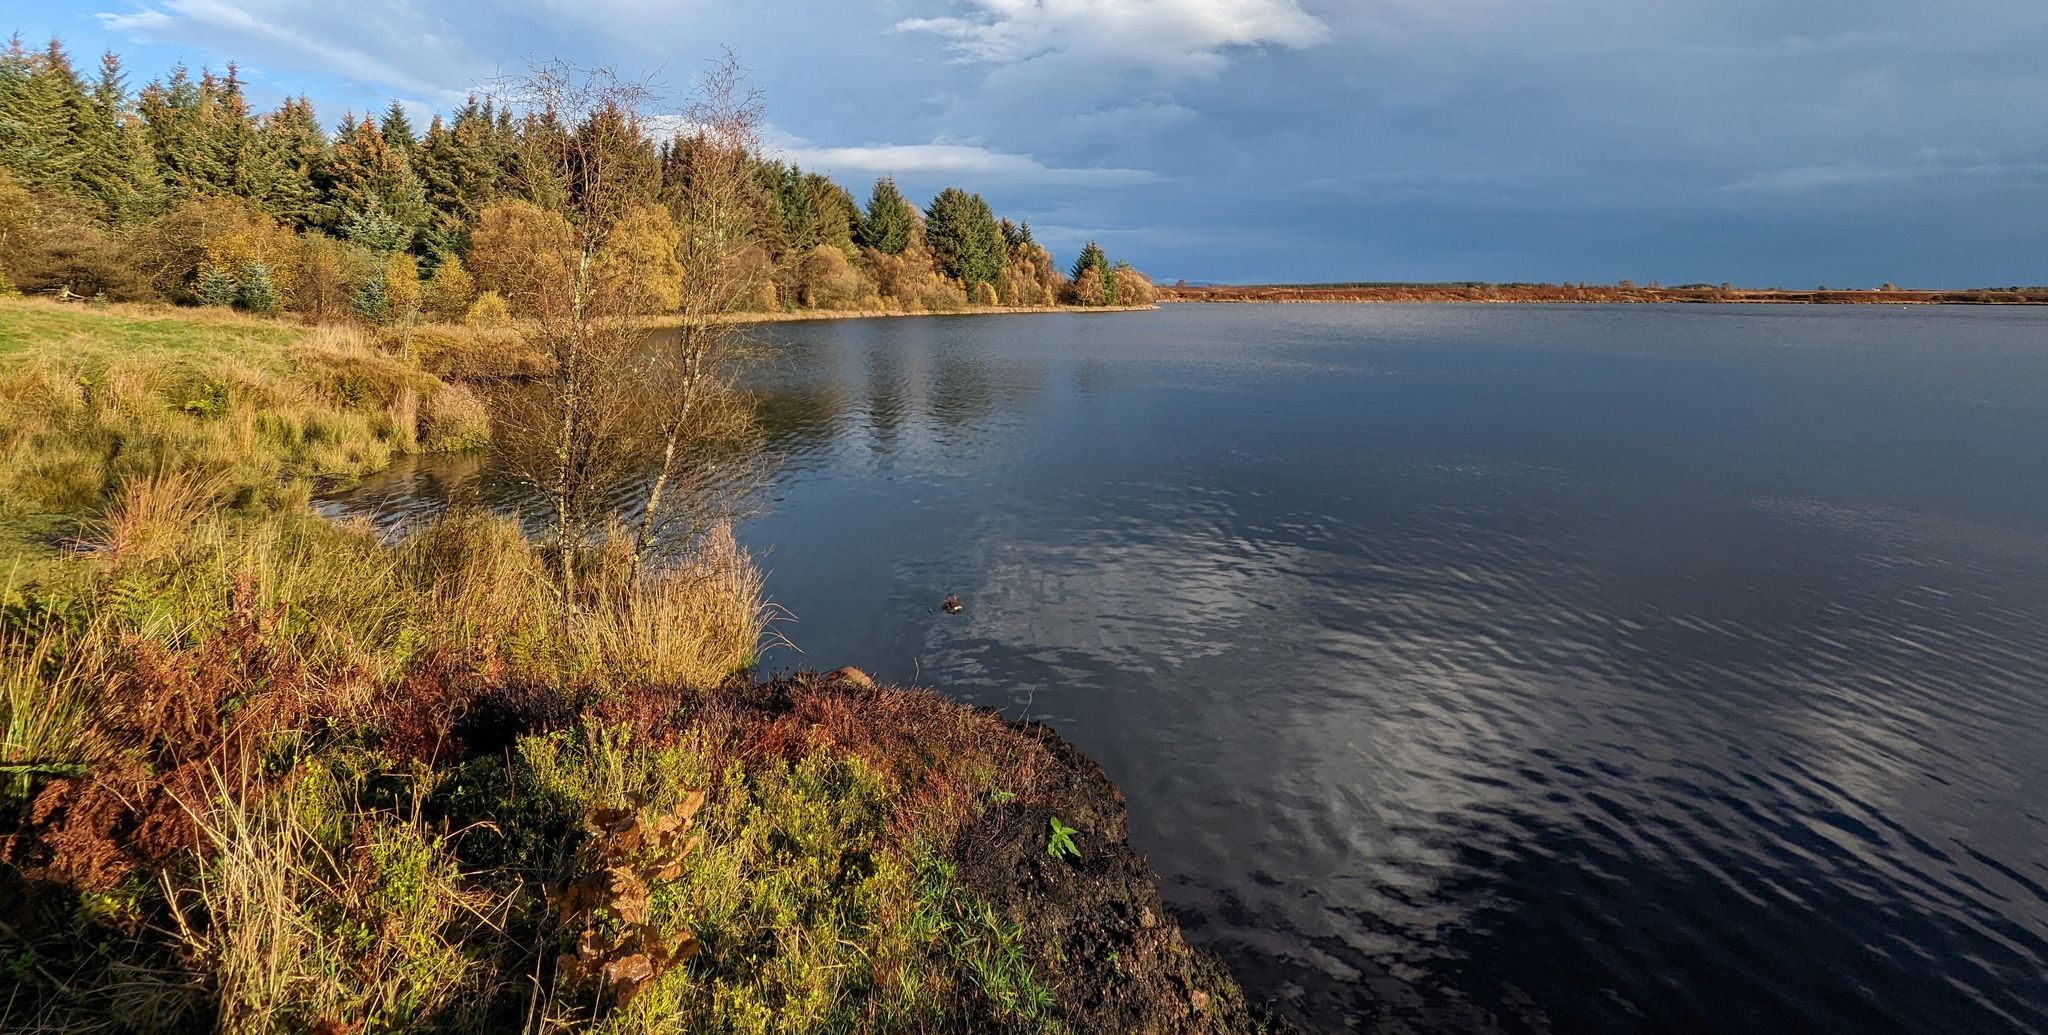 Fannyside Loch in Palacerigg Country Park